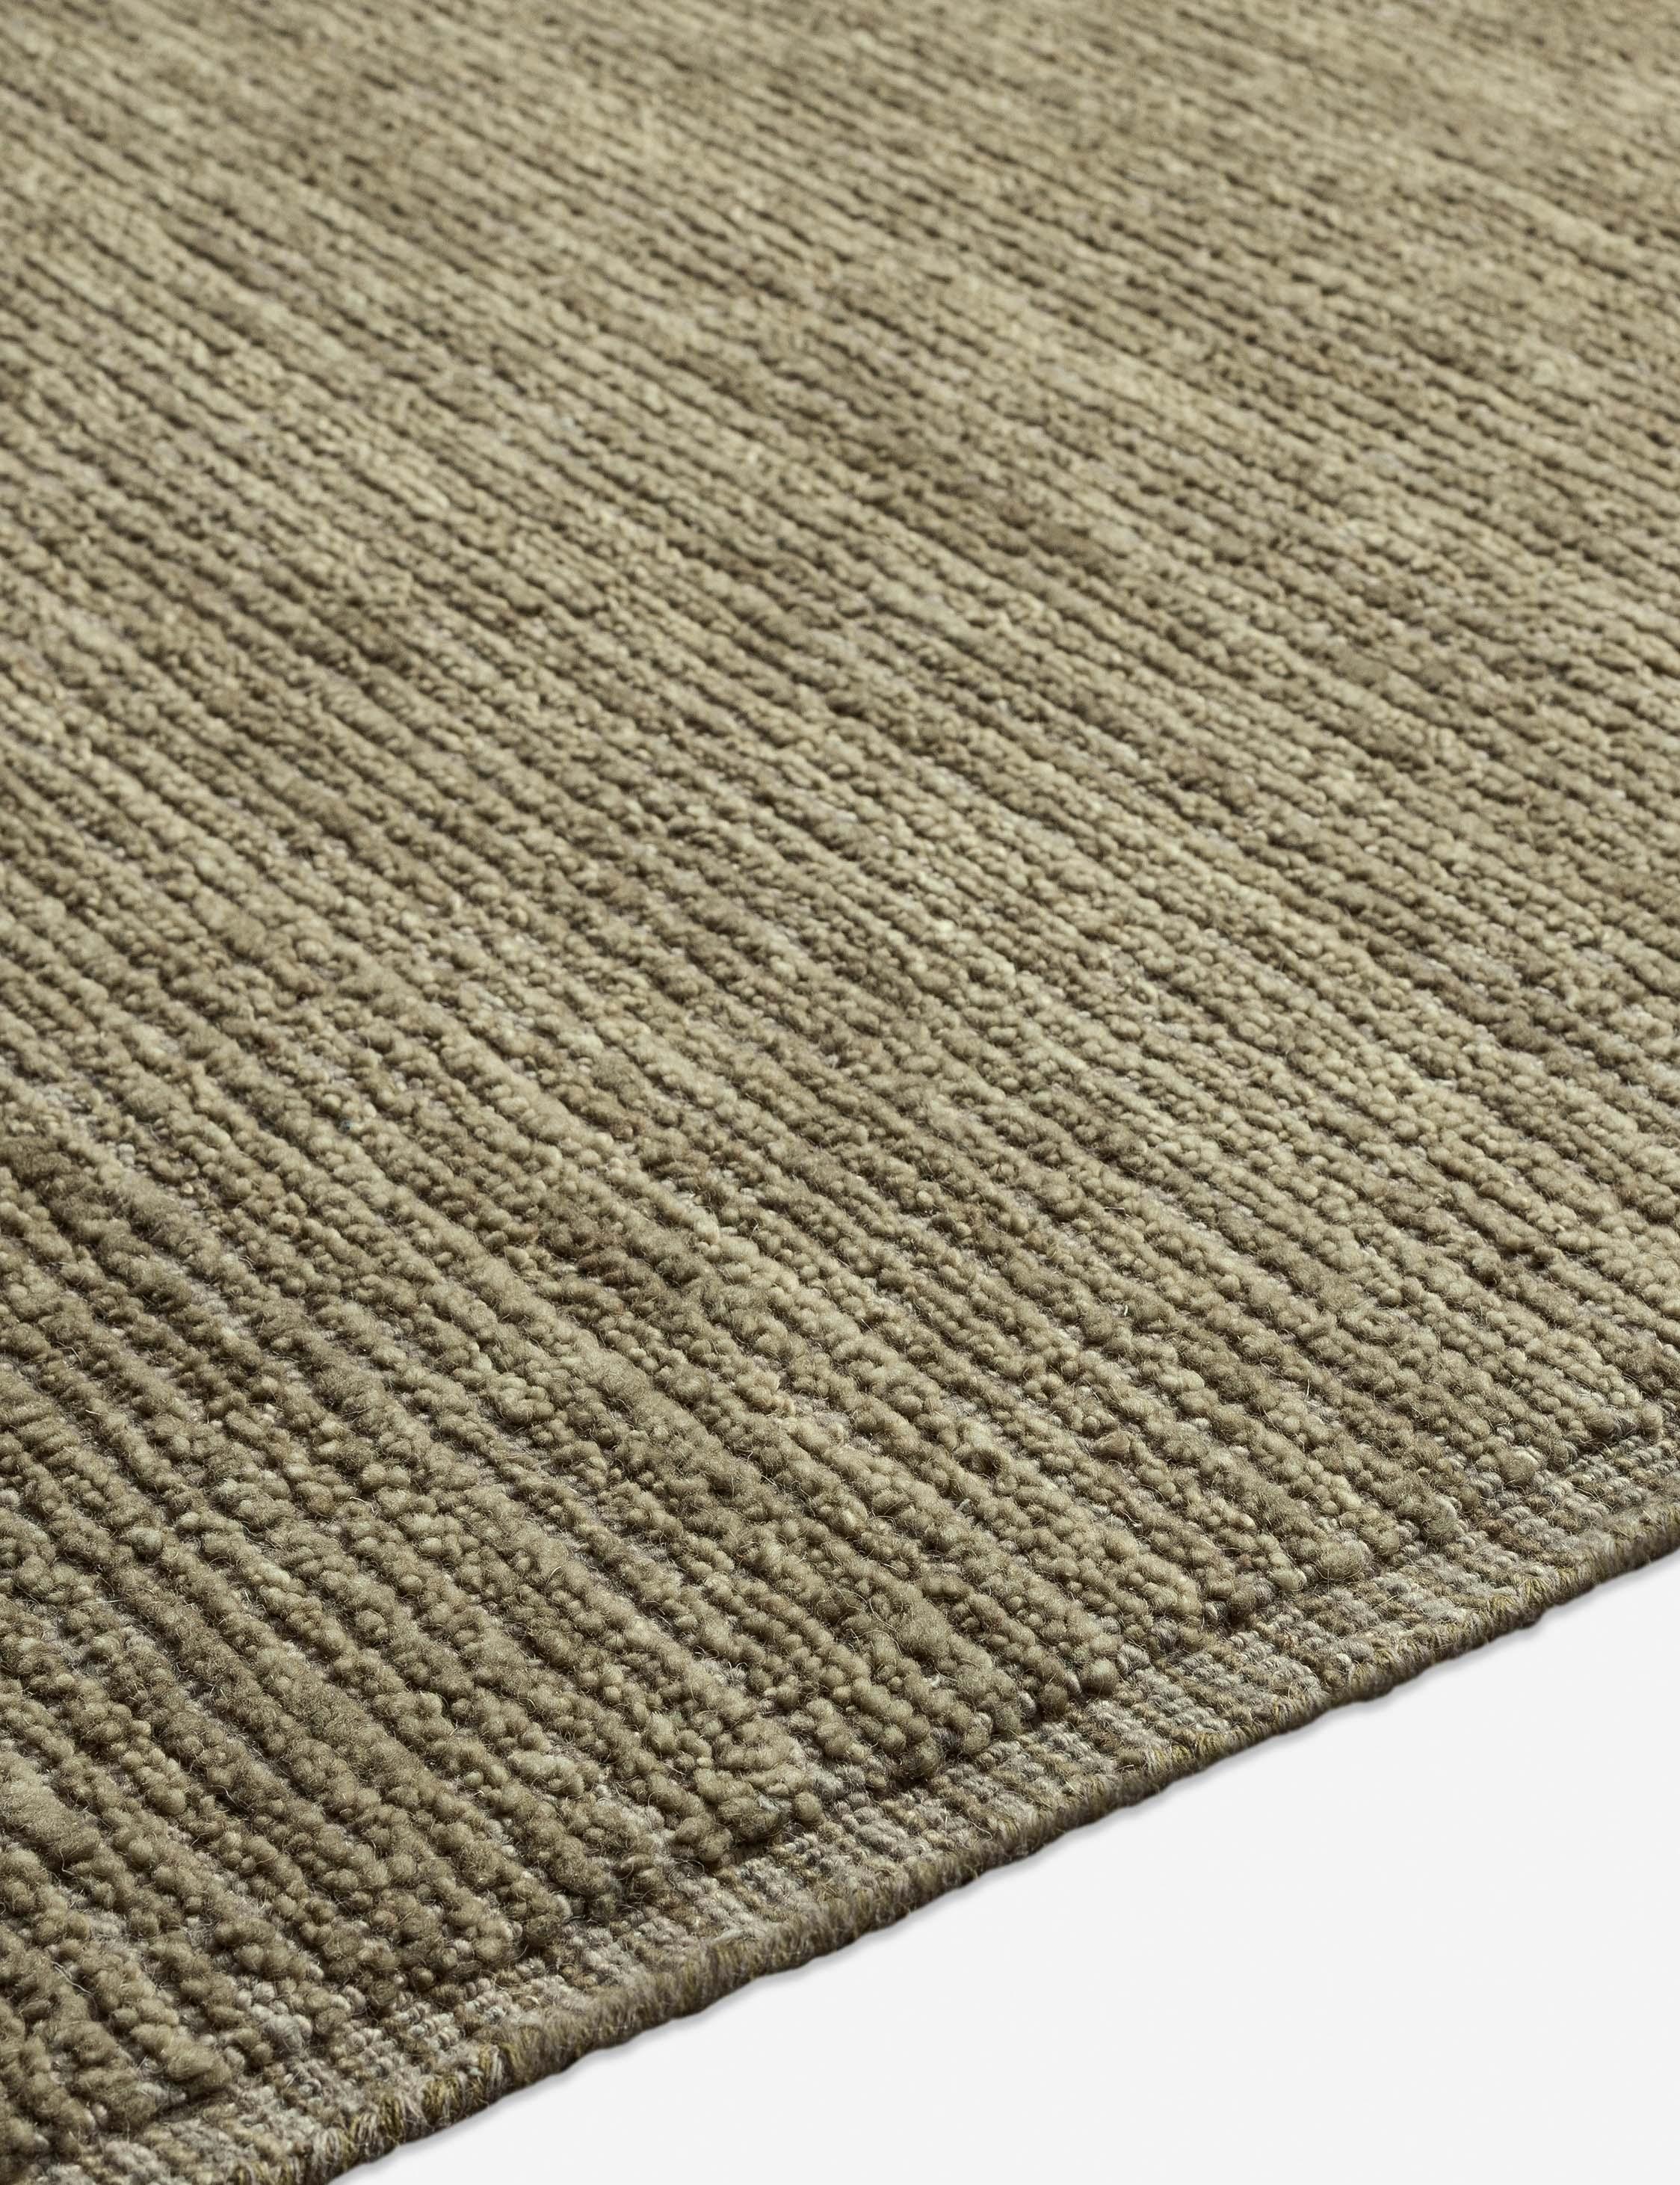 Adalia Hand-Knotted Easy Care Wool Area Rug, 10' x 14', Gray